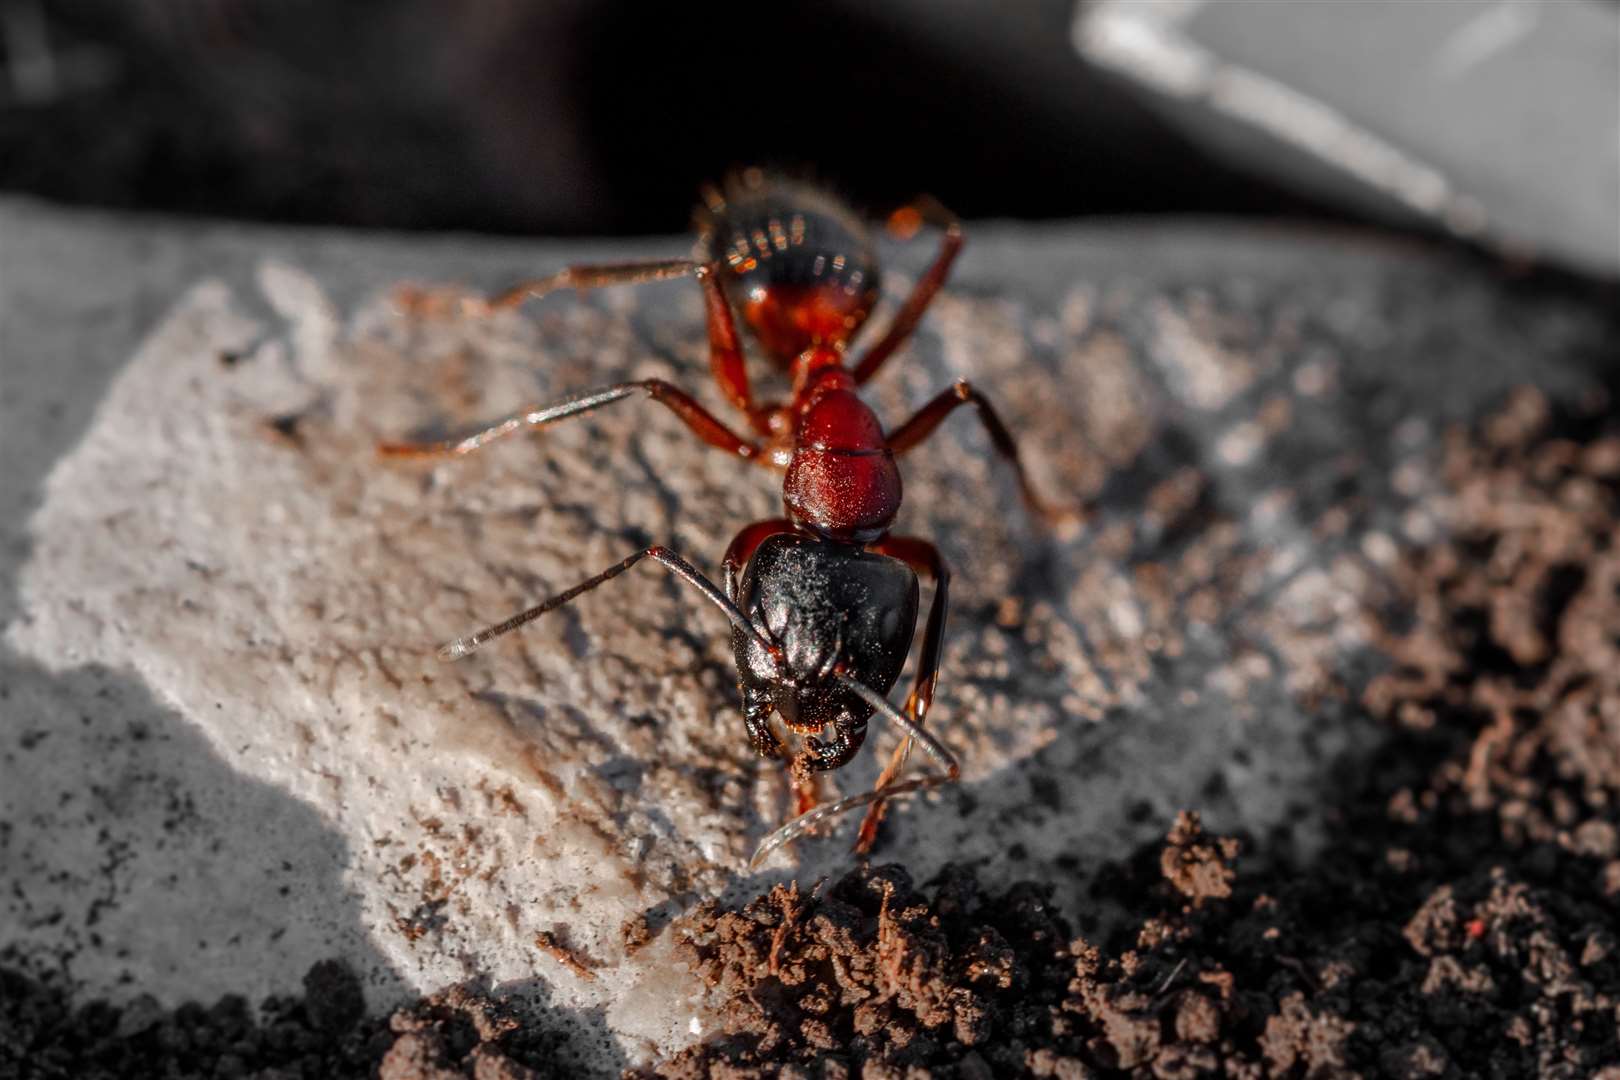 A man was left needing an ambulance after being attacked by fire ants. Picture: iStock